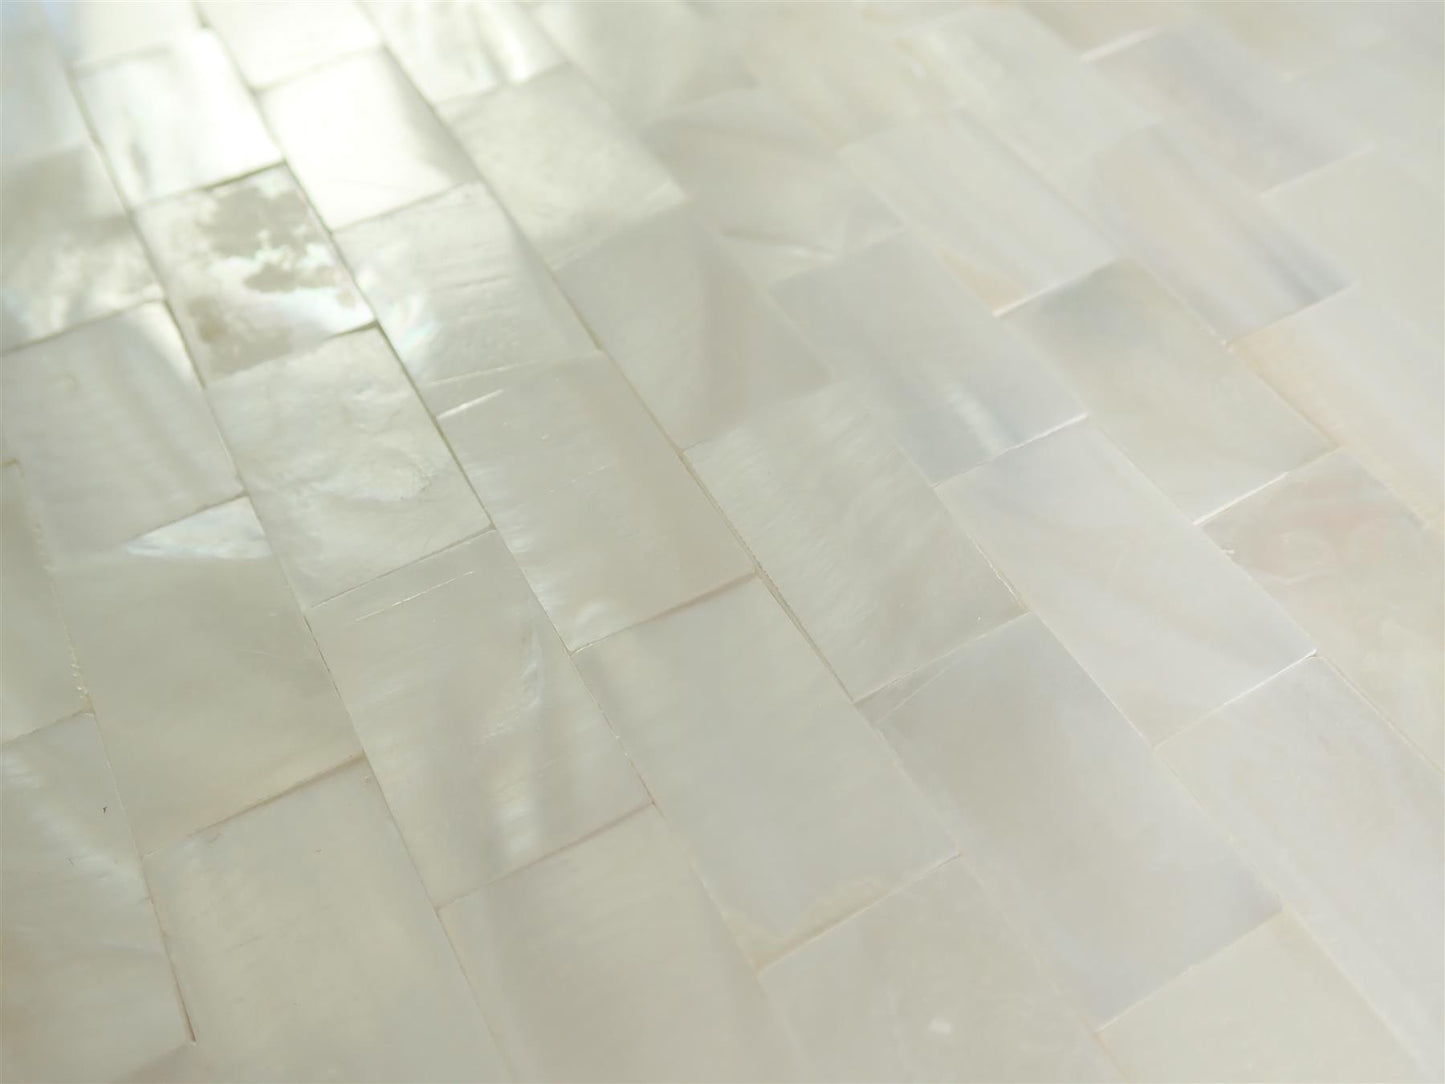 Incudo White Gapless Metro Mosaic Mother of Pearl Tiles - 288x300x2mm (11.3x11.81x0.08"), Pack of 12, 1.04 Sq. M